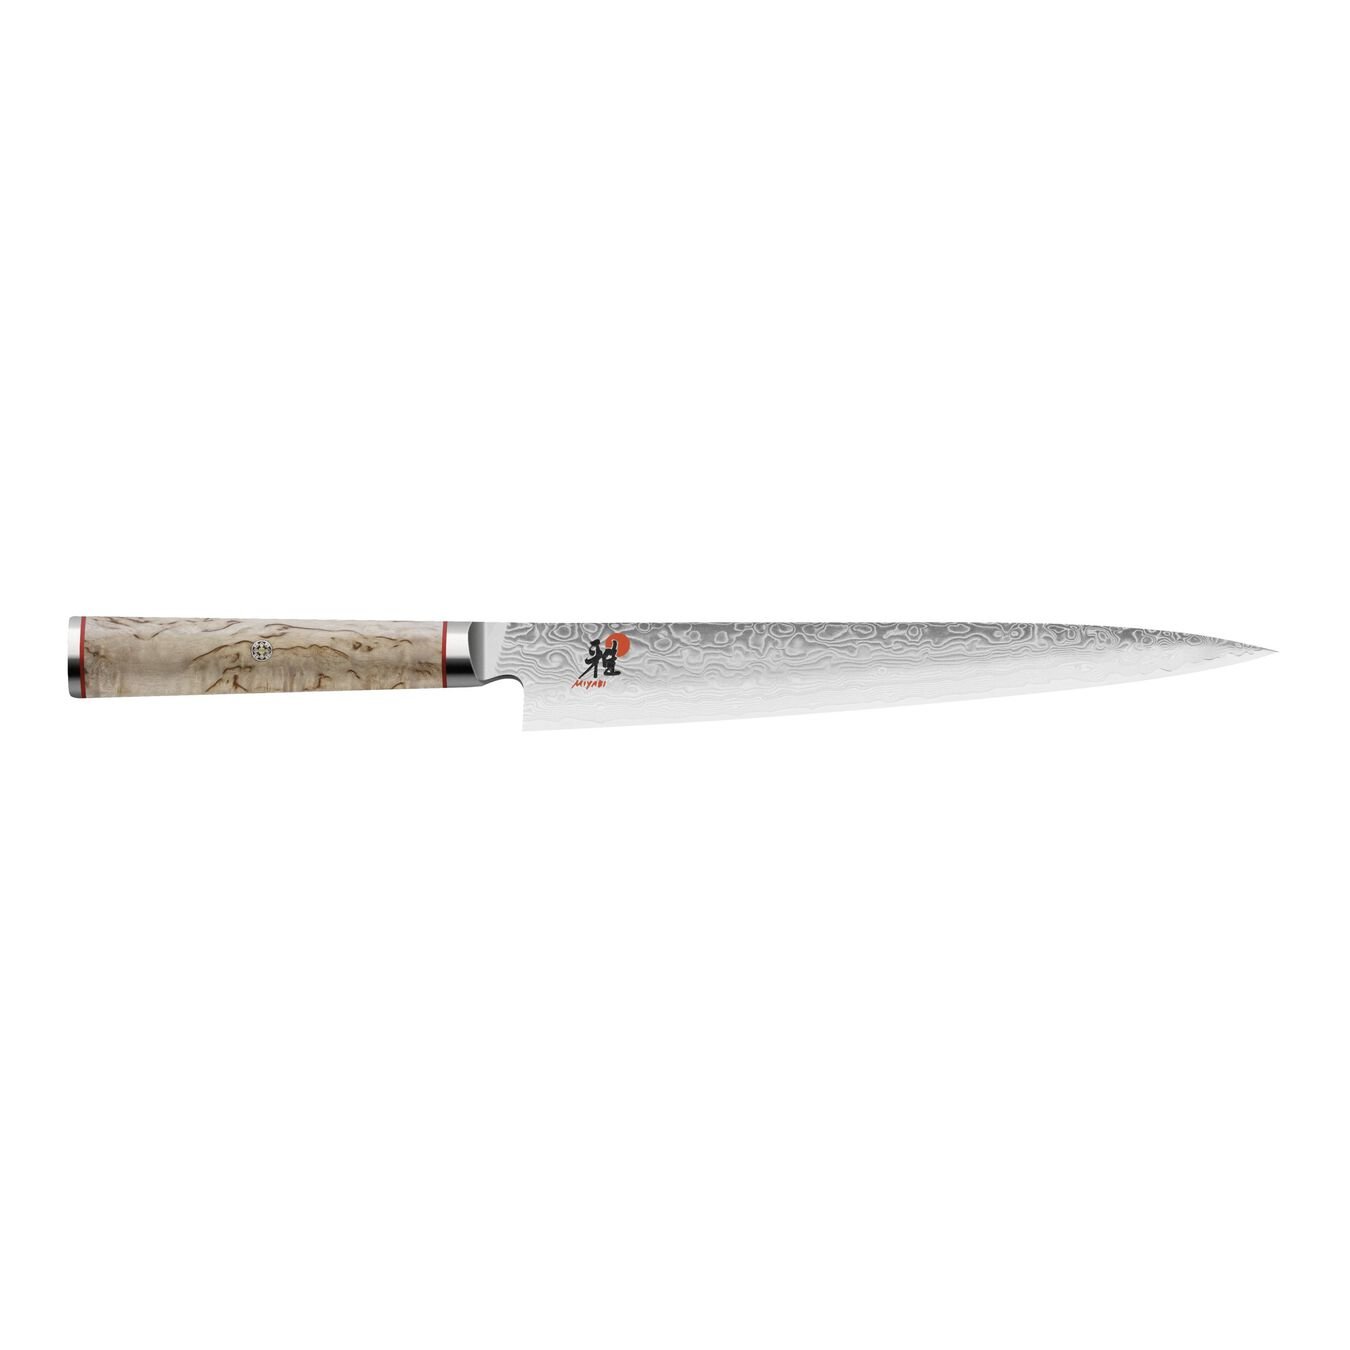 9-inch birch Slicing/Carving Knife,,large 1